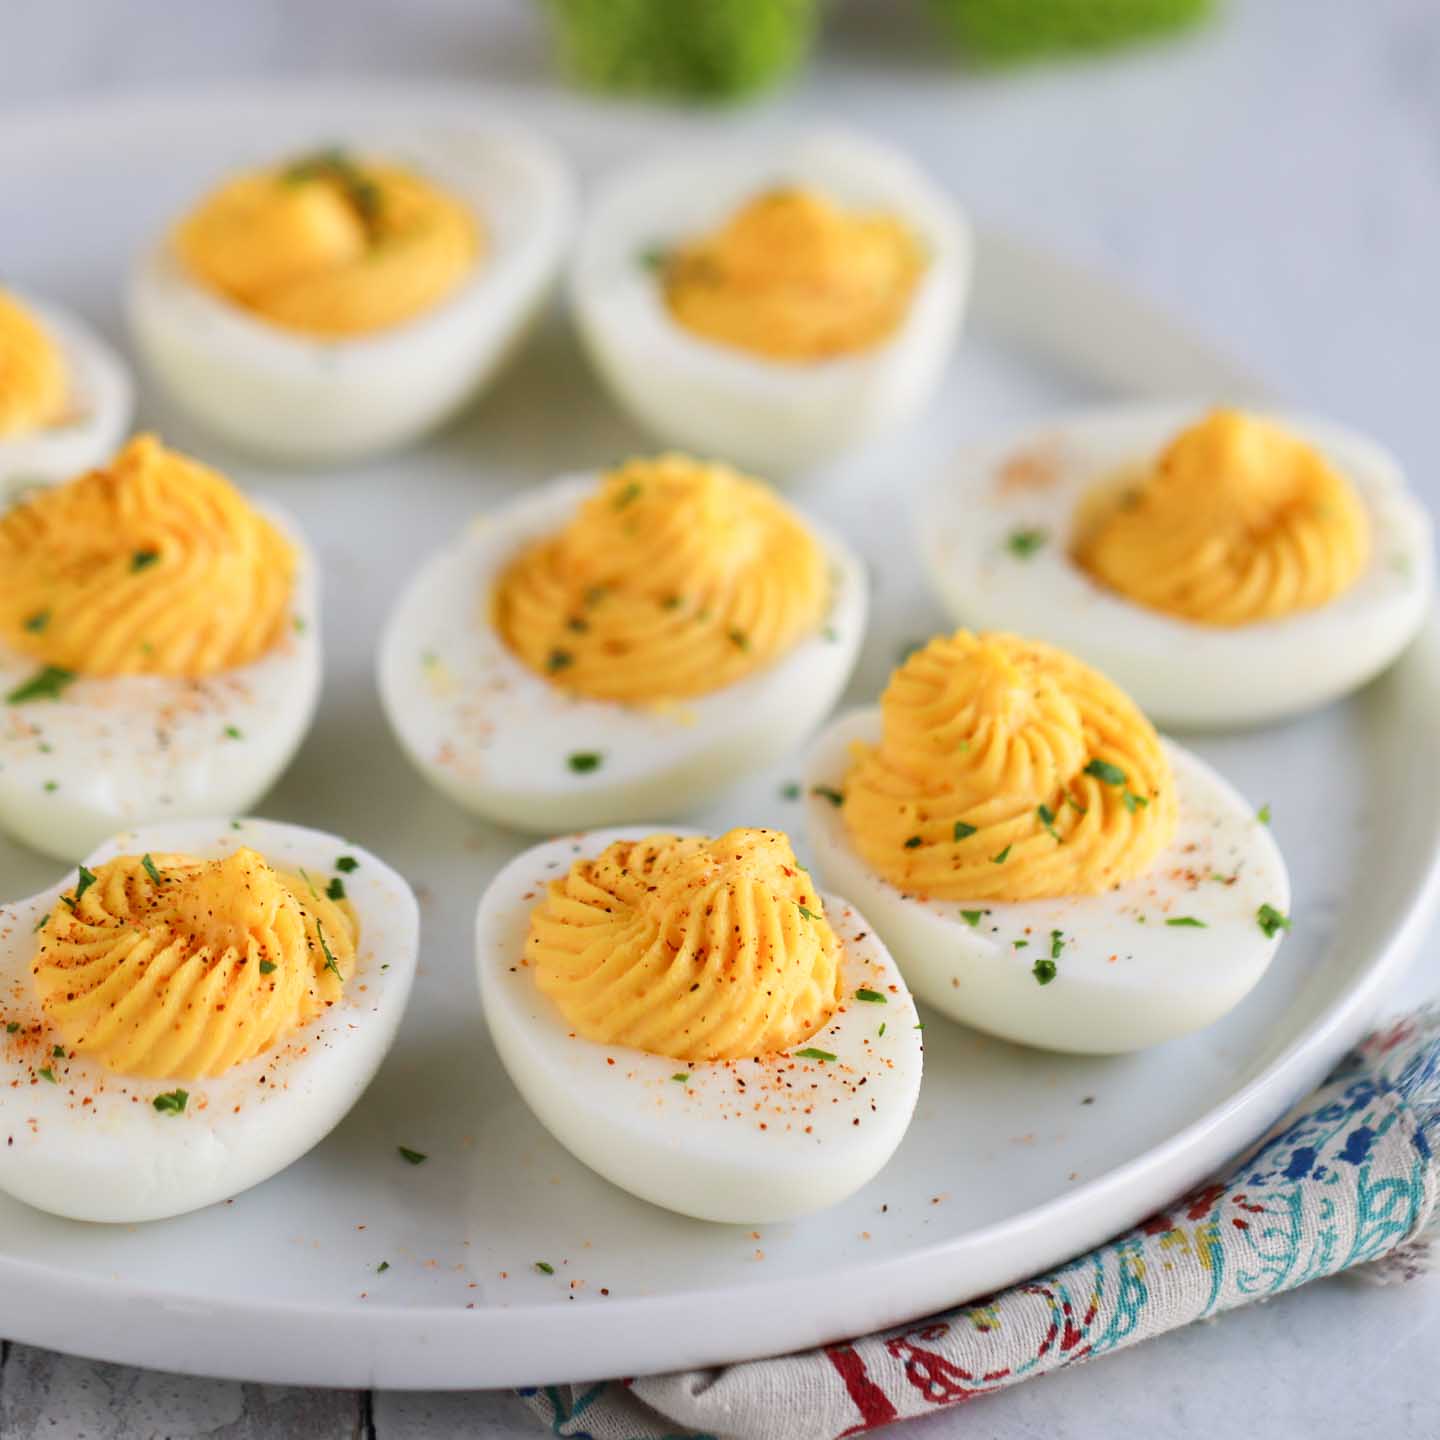 How to make easy and delicious classic Deviled Eggs